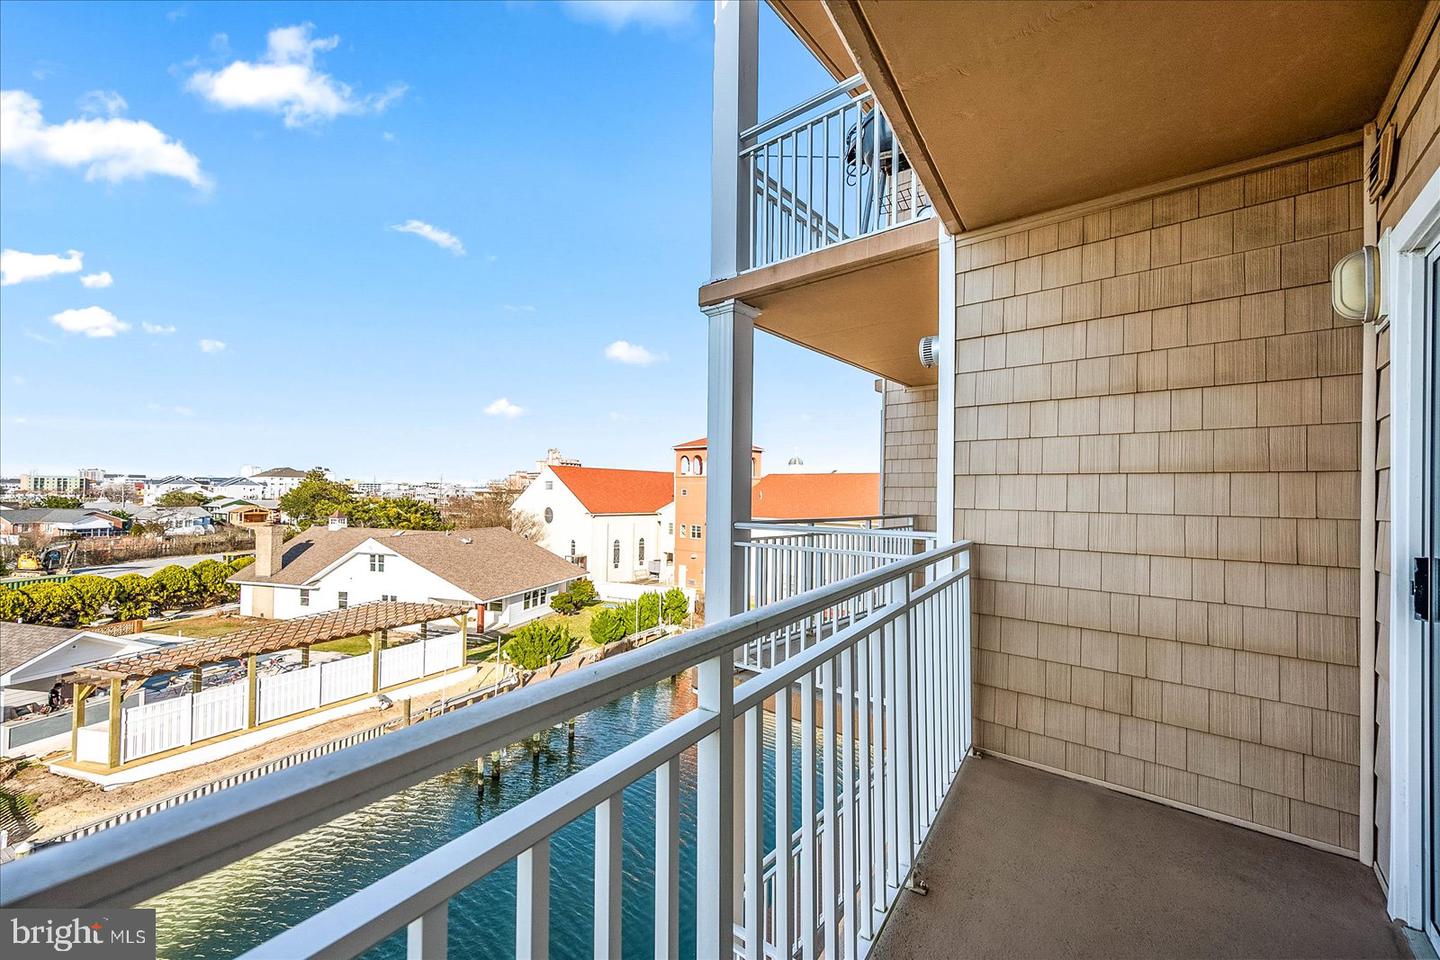 MDWO2019672-802922311168-2024-03-15-14-18-06 300 17th St #303 | Ocean City, MD Real Estate For Sale | MLS# Mdwo2019672  - 1st Choice Properties